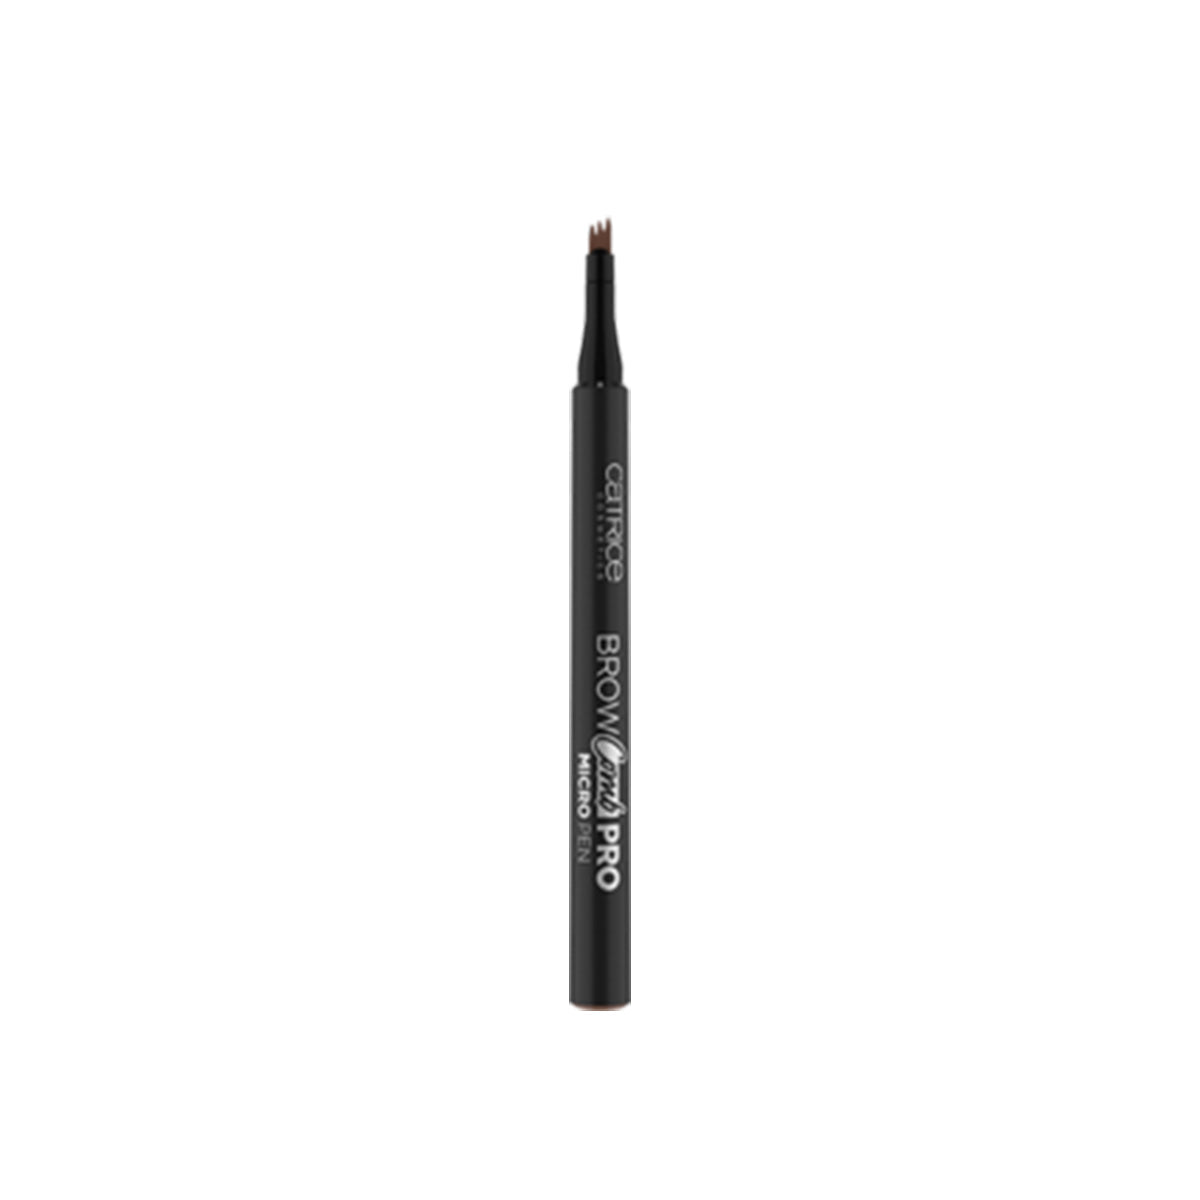 BROW COMB PRO MICRO PEN 020 SOFT BROWN - CATRICE